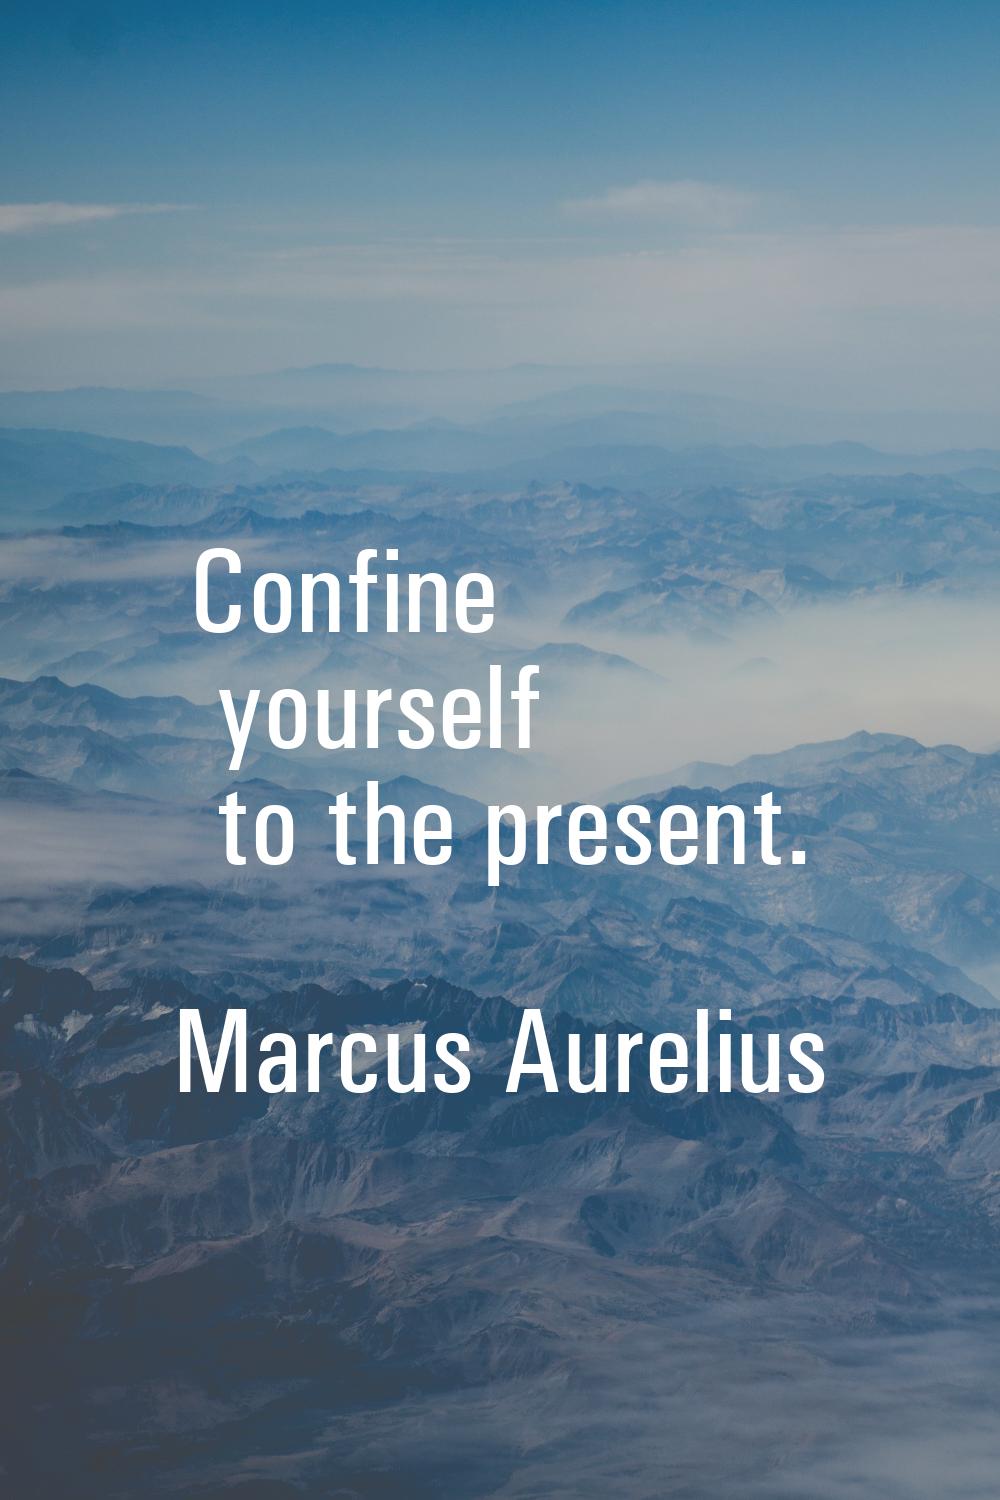 Confine yourself to the present.